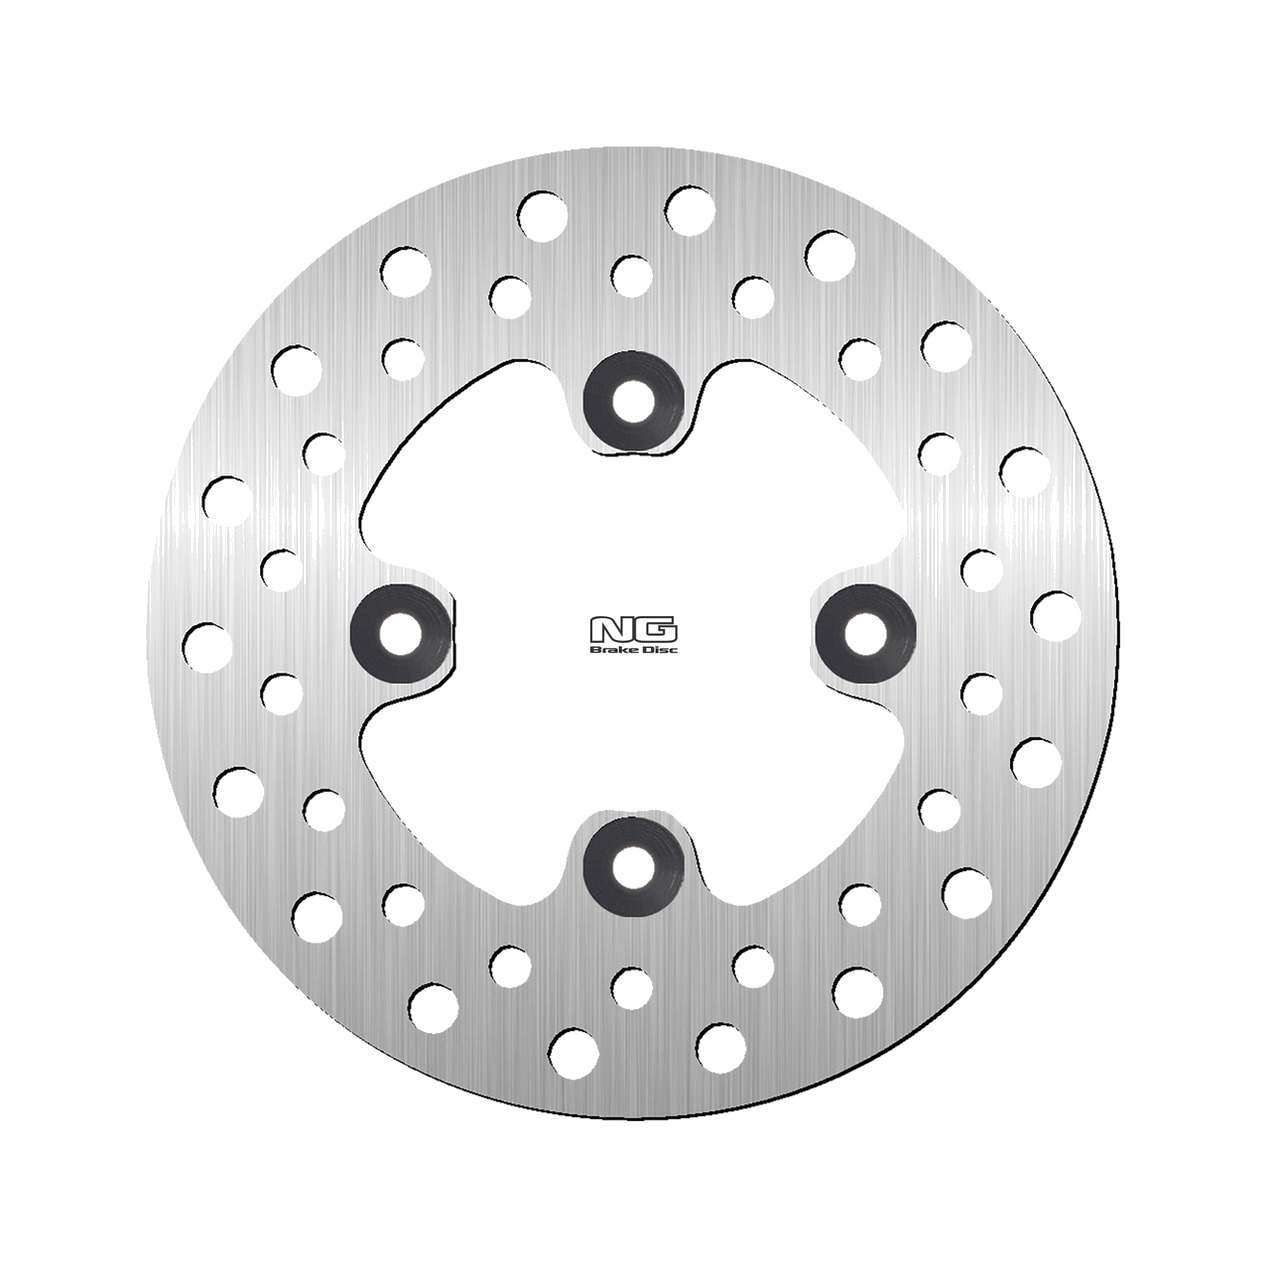 NG BRAKE DISK BRAKE DISK 1825 compatible with POLARIS PHOENIX 200 200 2005-2020 - Picture 1 of 1